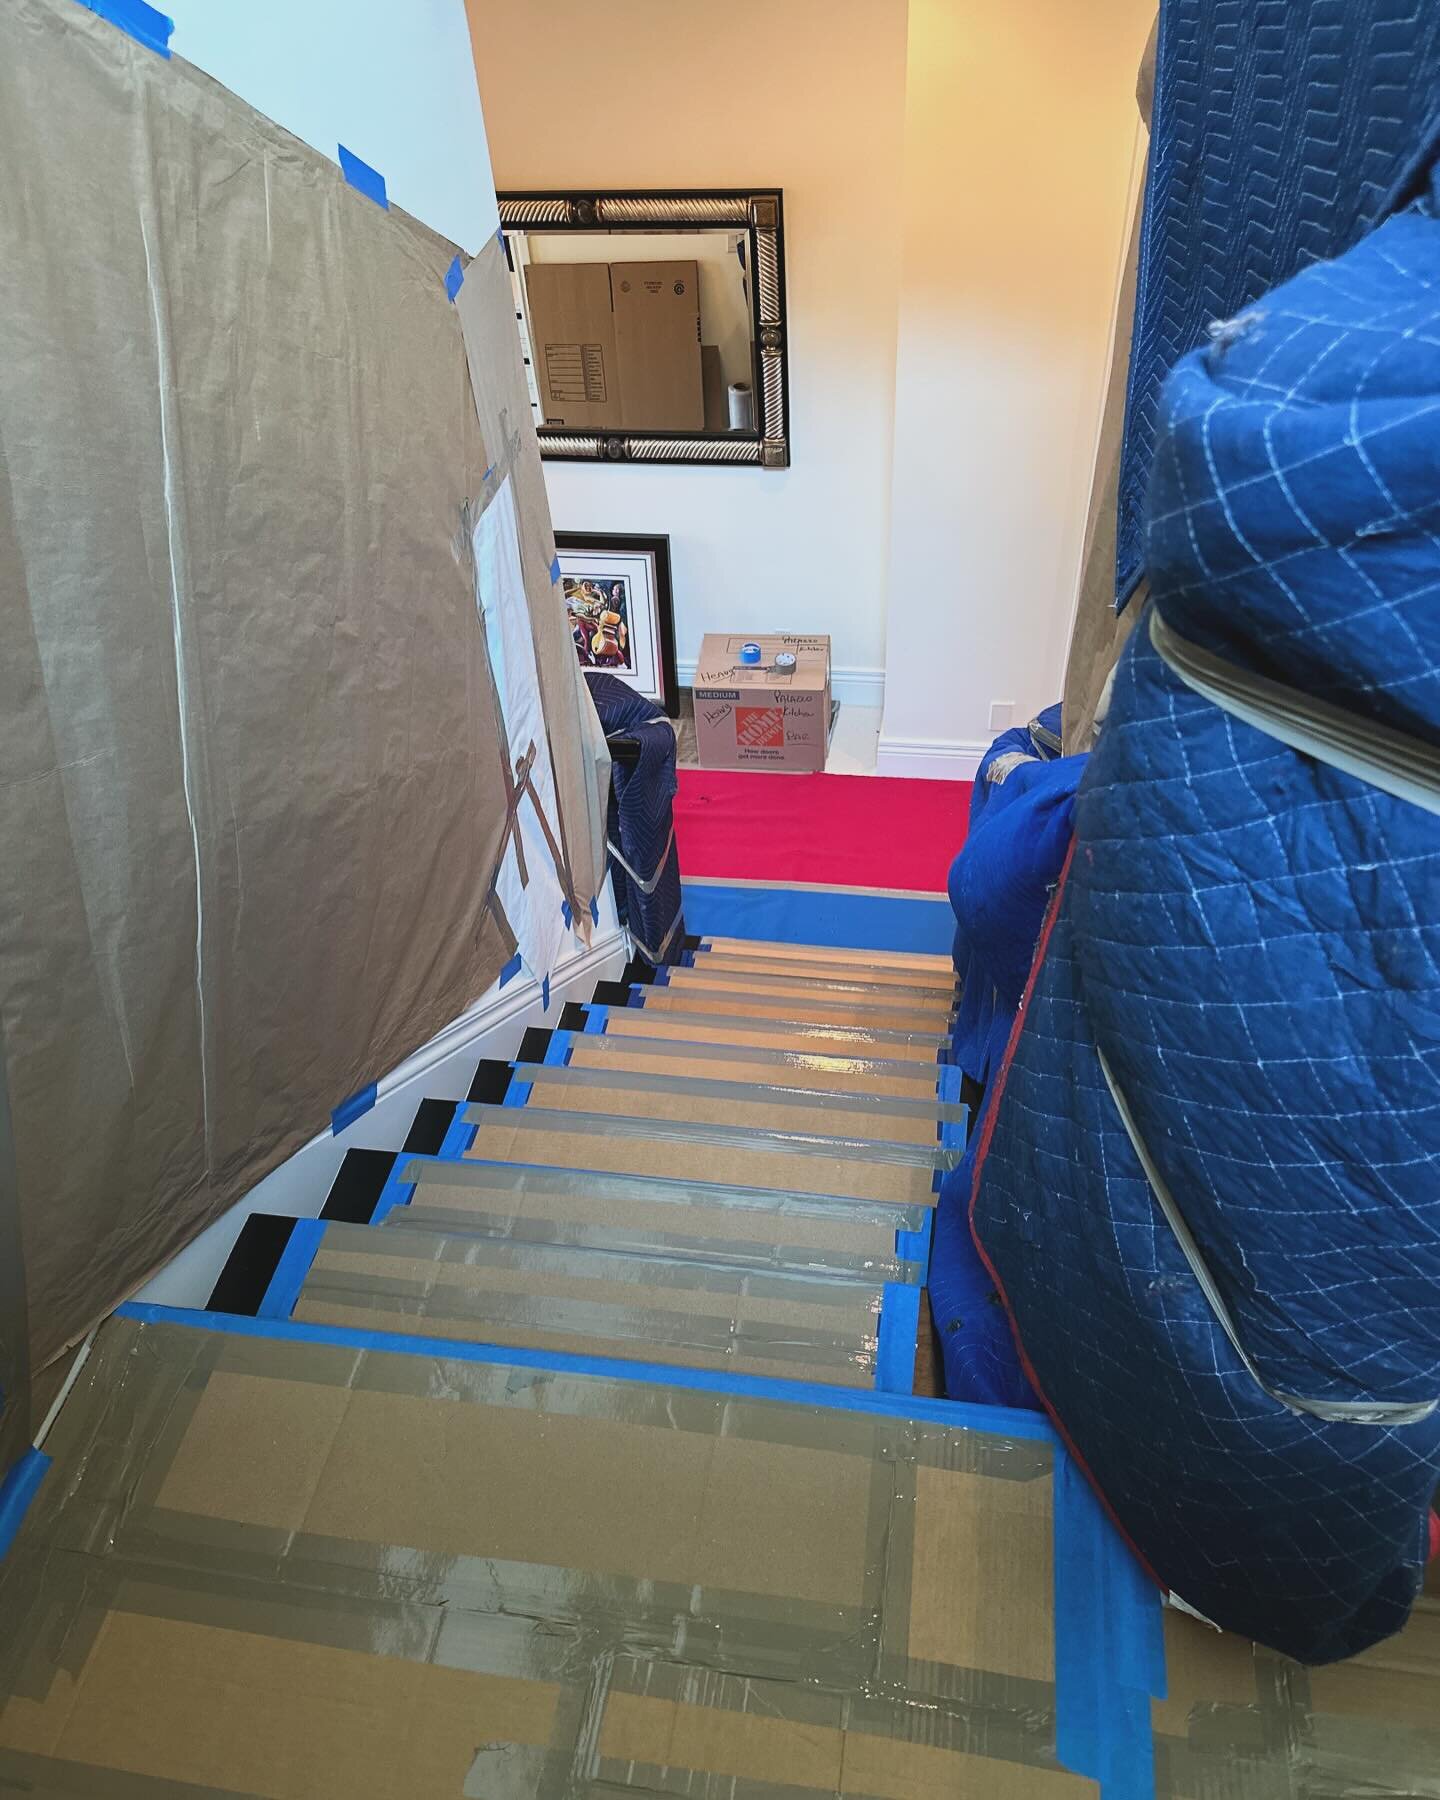 GREEN FLAG ✅: when your movers prep your home like this before moving any of your belongings 

✅👏🏼✅👏🏼

#movingandstorage #movingprep #movingday #moving #movingcompany #verobeach #indianriver